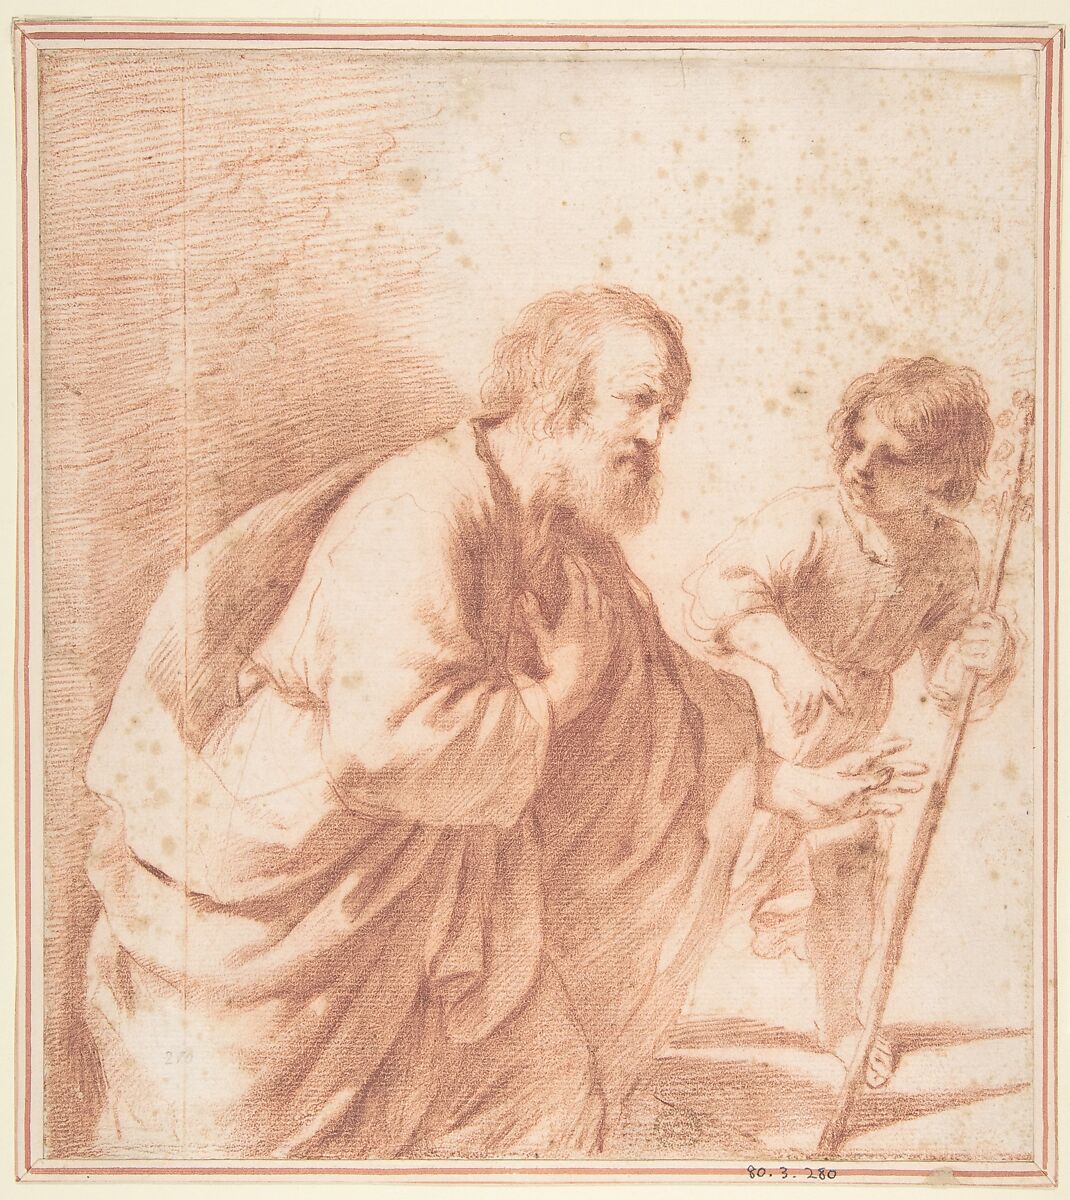 Saint Joseph Seen with his Flowering Staff, which is Held by the Christ Child, Attributed to Guercino (Giovanni Francesco Barbieri) (Italian, Cento 1591–1666 Bologna), Red chalk 